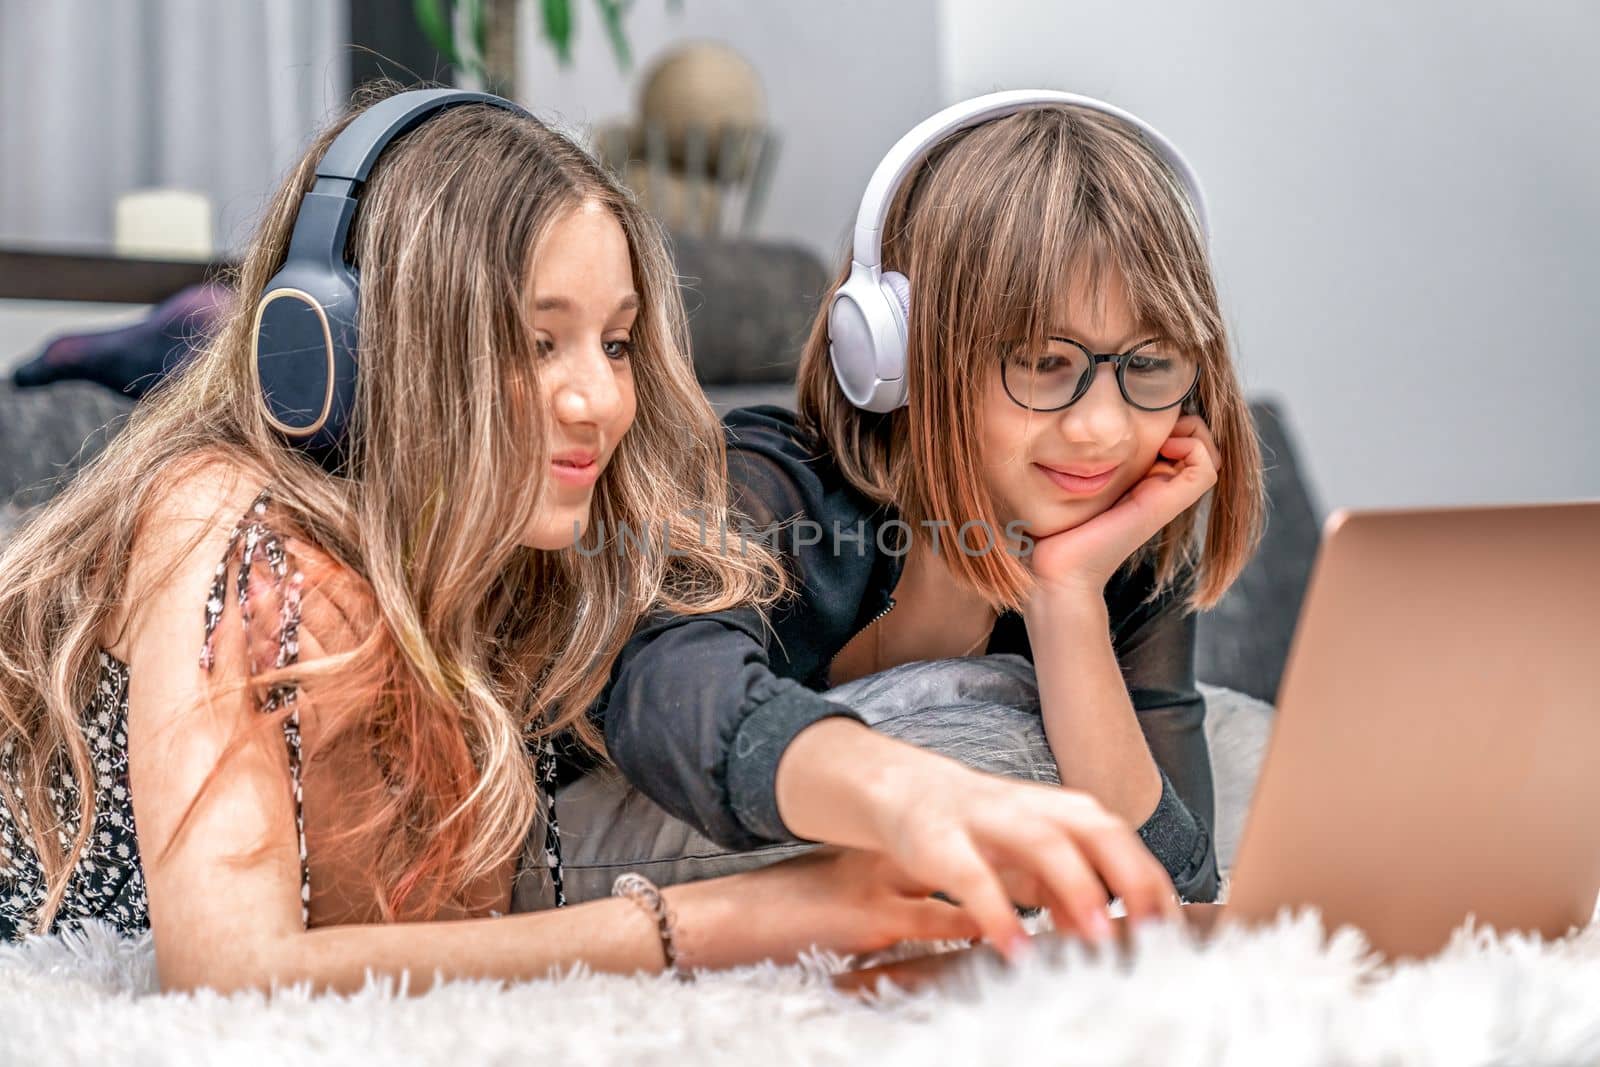 children with wireless headphones on their heads enjoy internet entertainment online on a laptop at home. High quality photo